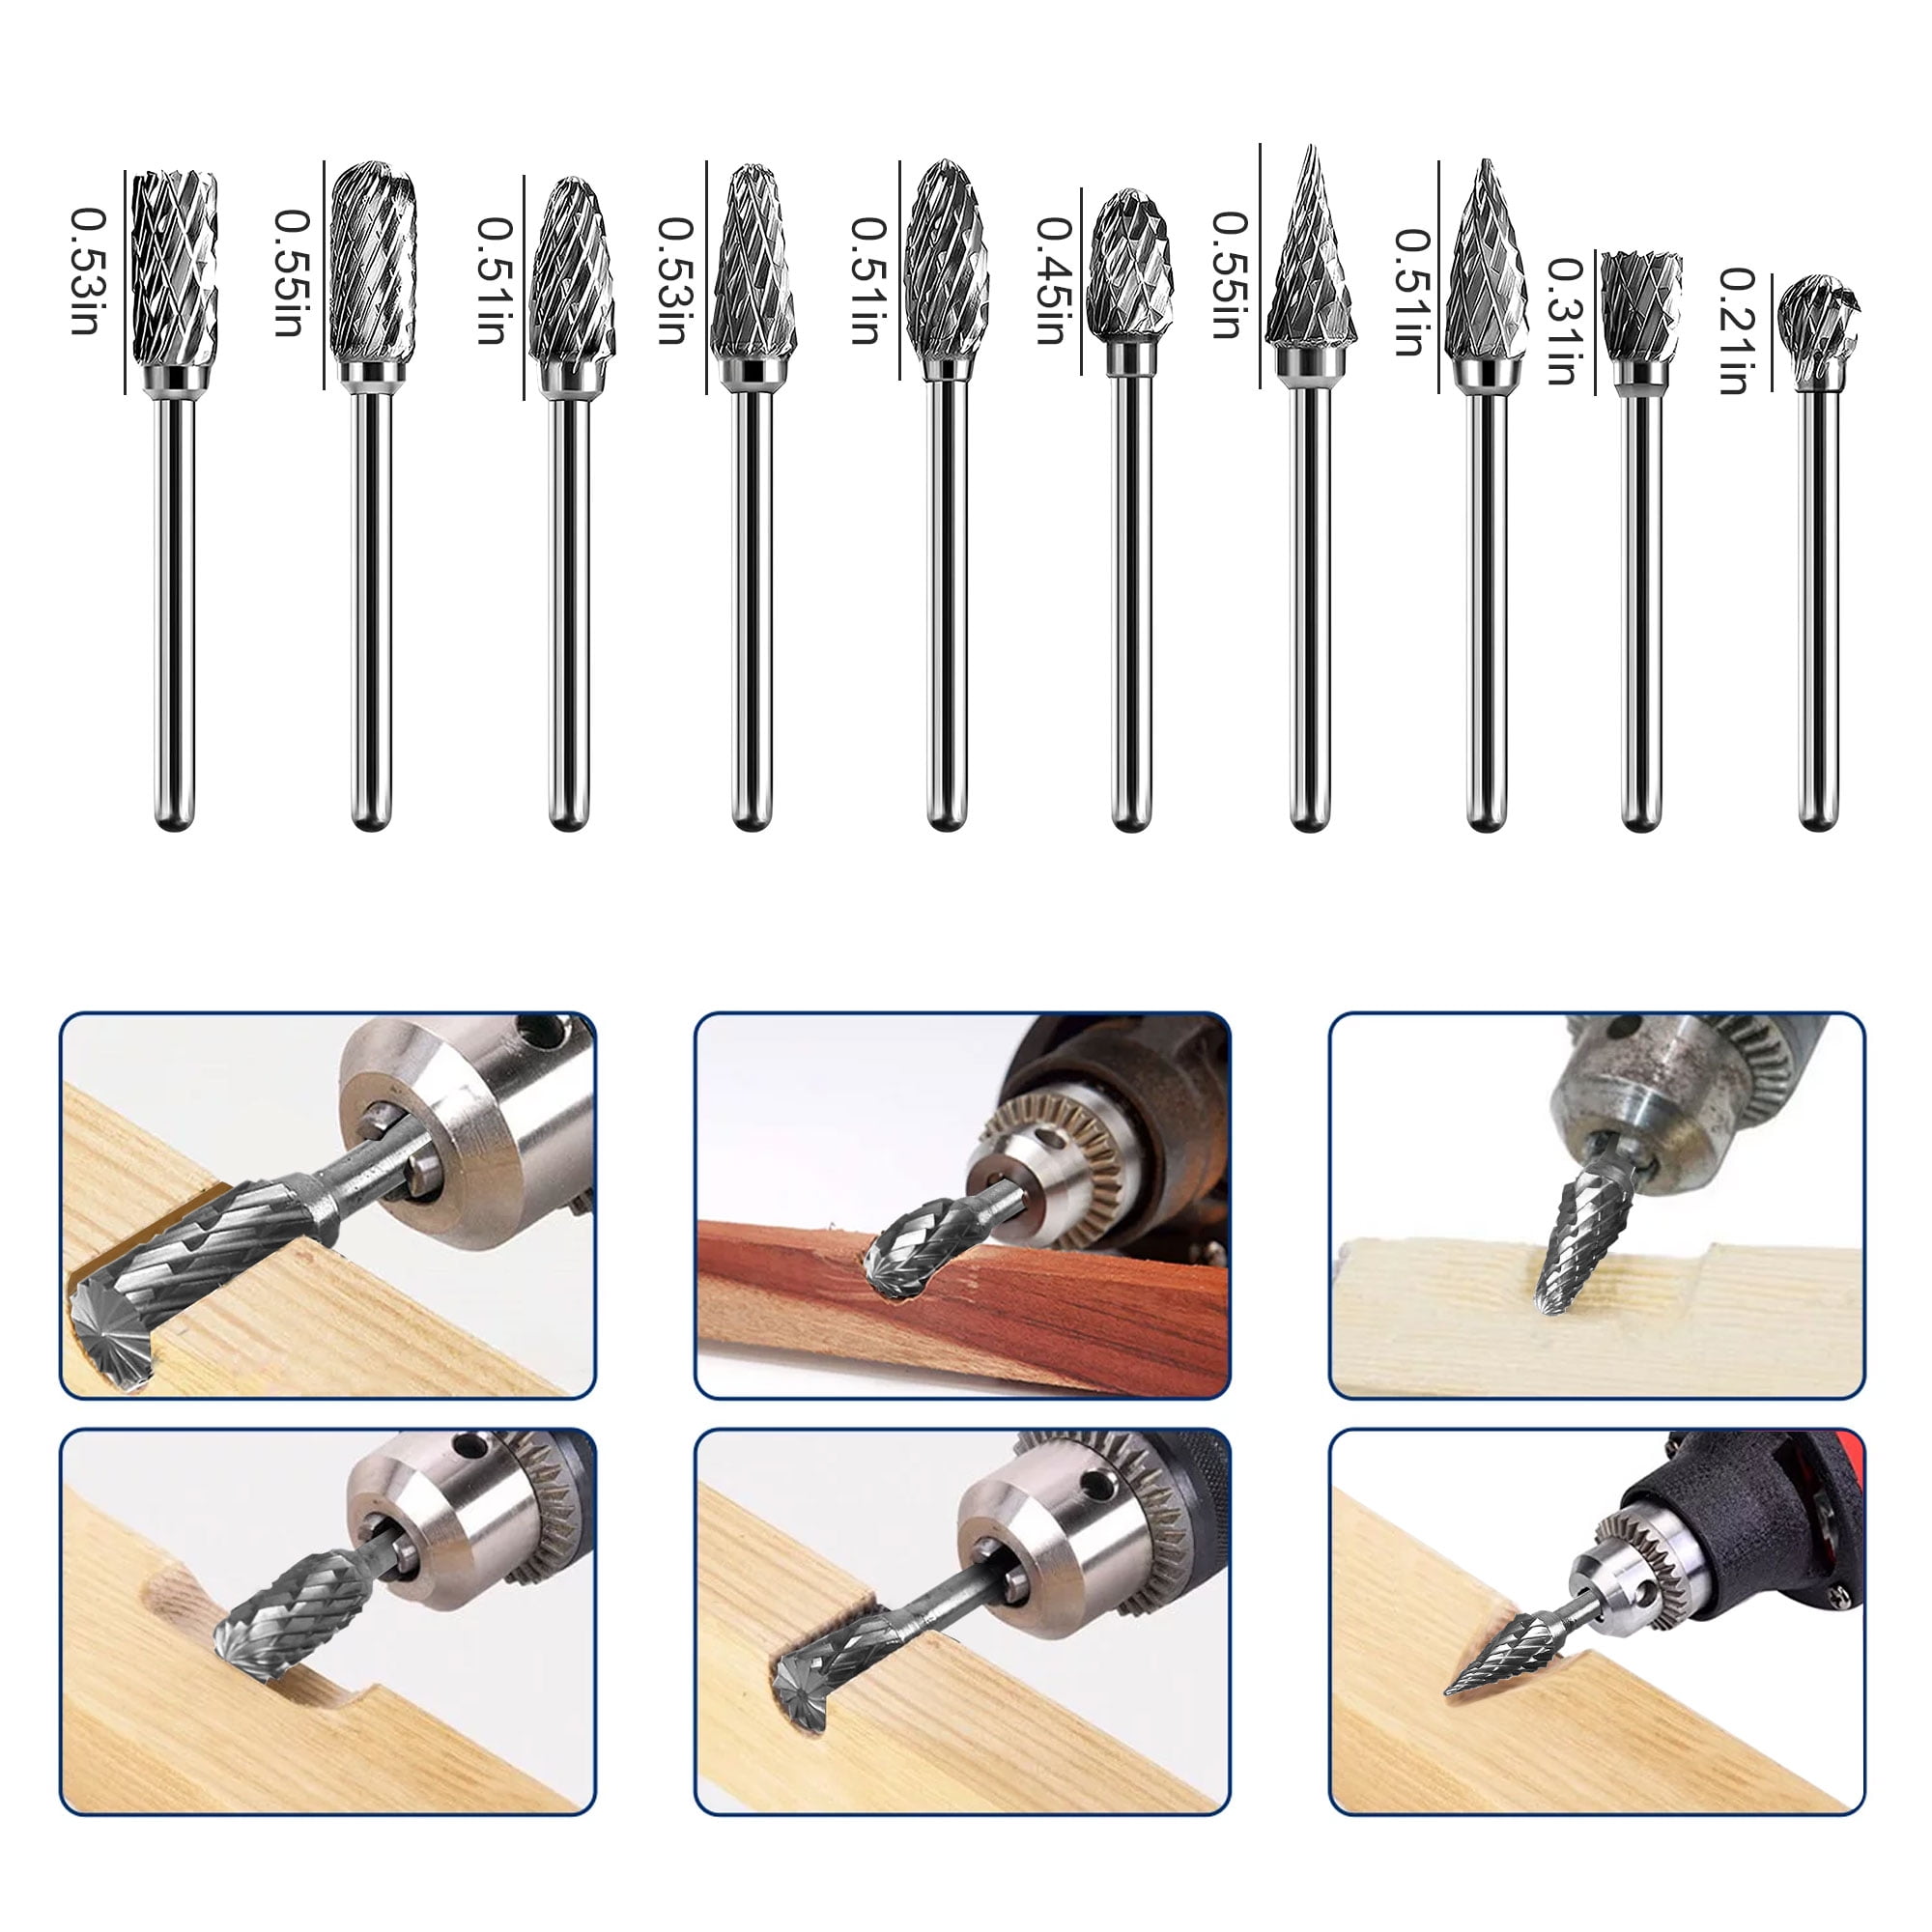 Double Cut Tungsten Carbide Carving Bits for Rotary Tool, 10 Pcs Rotary  Burr Set with 1/8 inch Shank and 1/4 inch Grinding Head for DIY,  Woodworking, Engraving, Metal Carving, Drilling, Polishing 